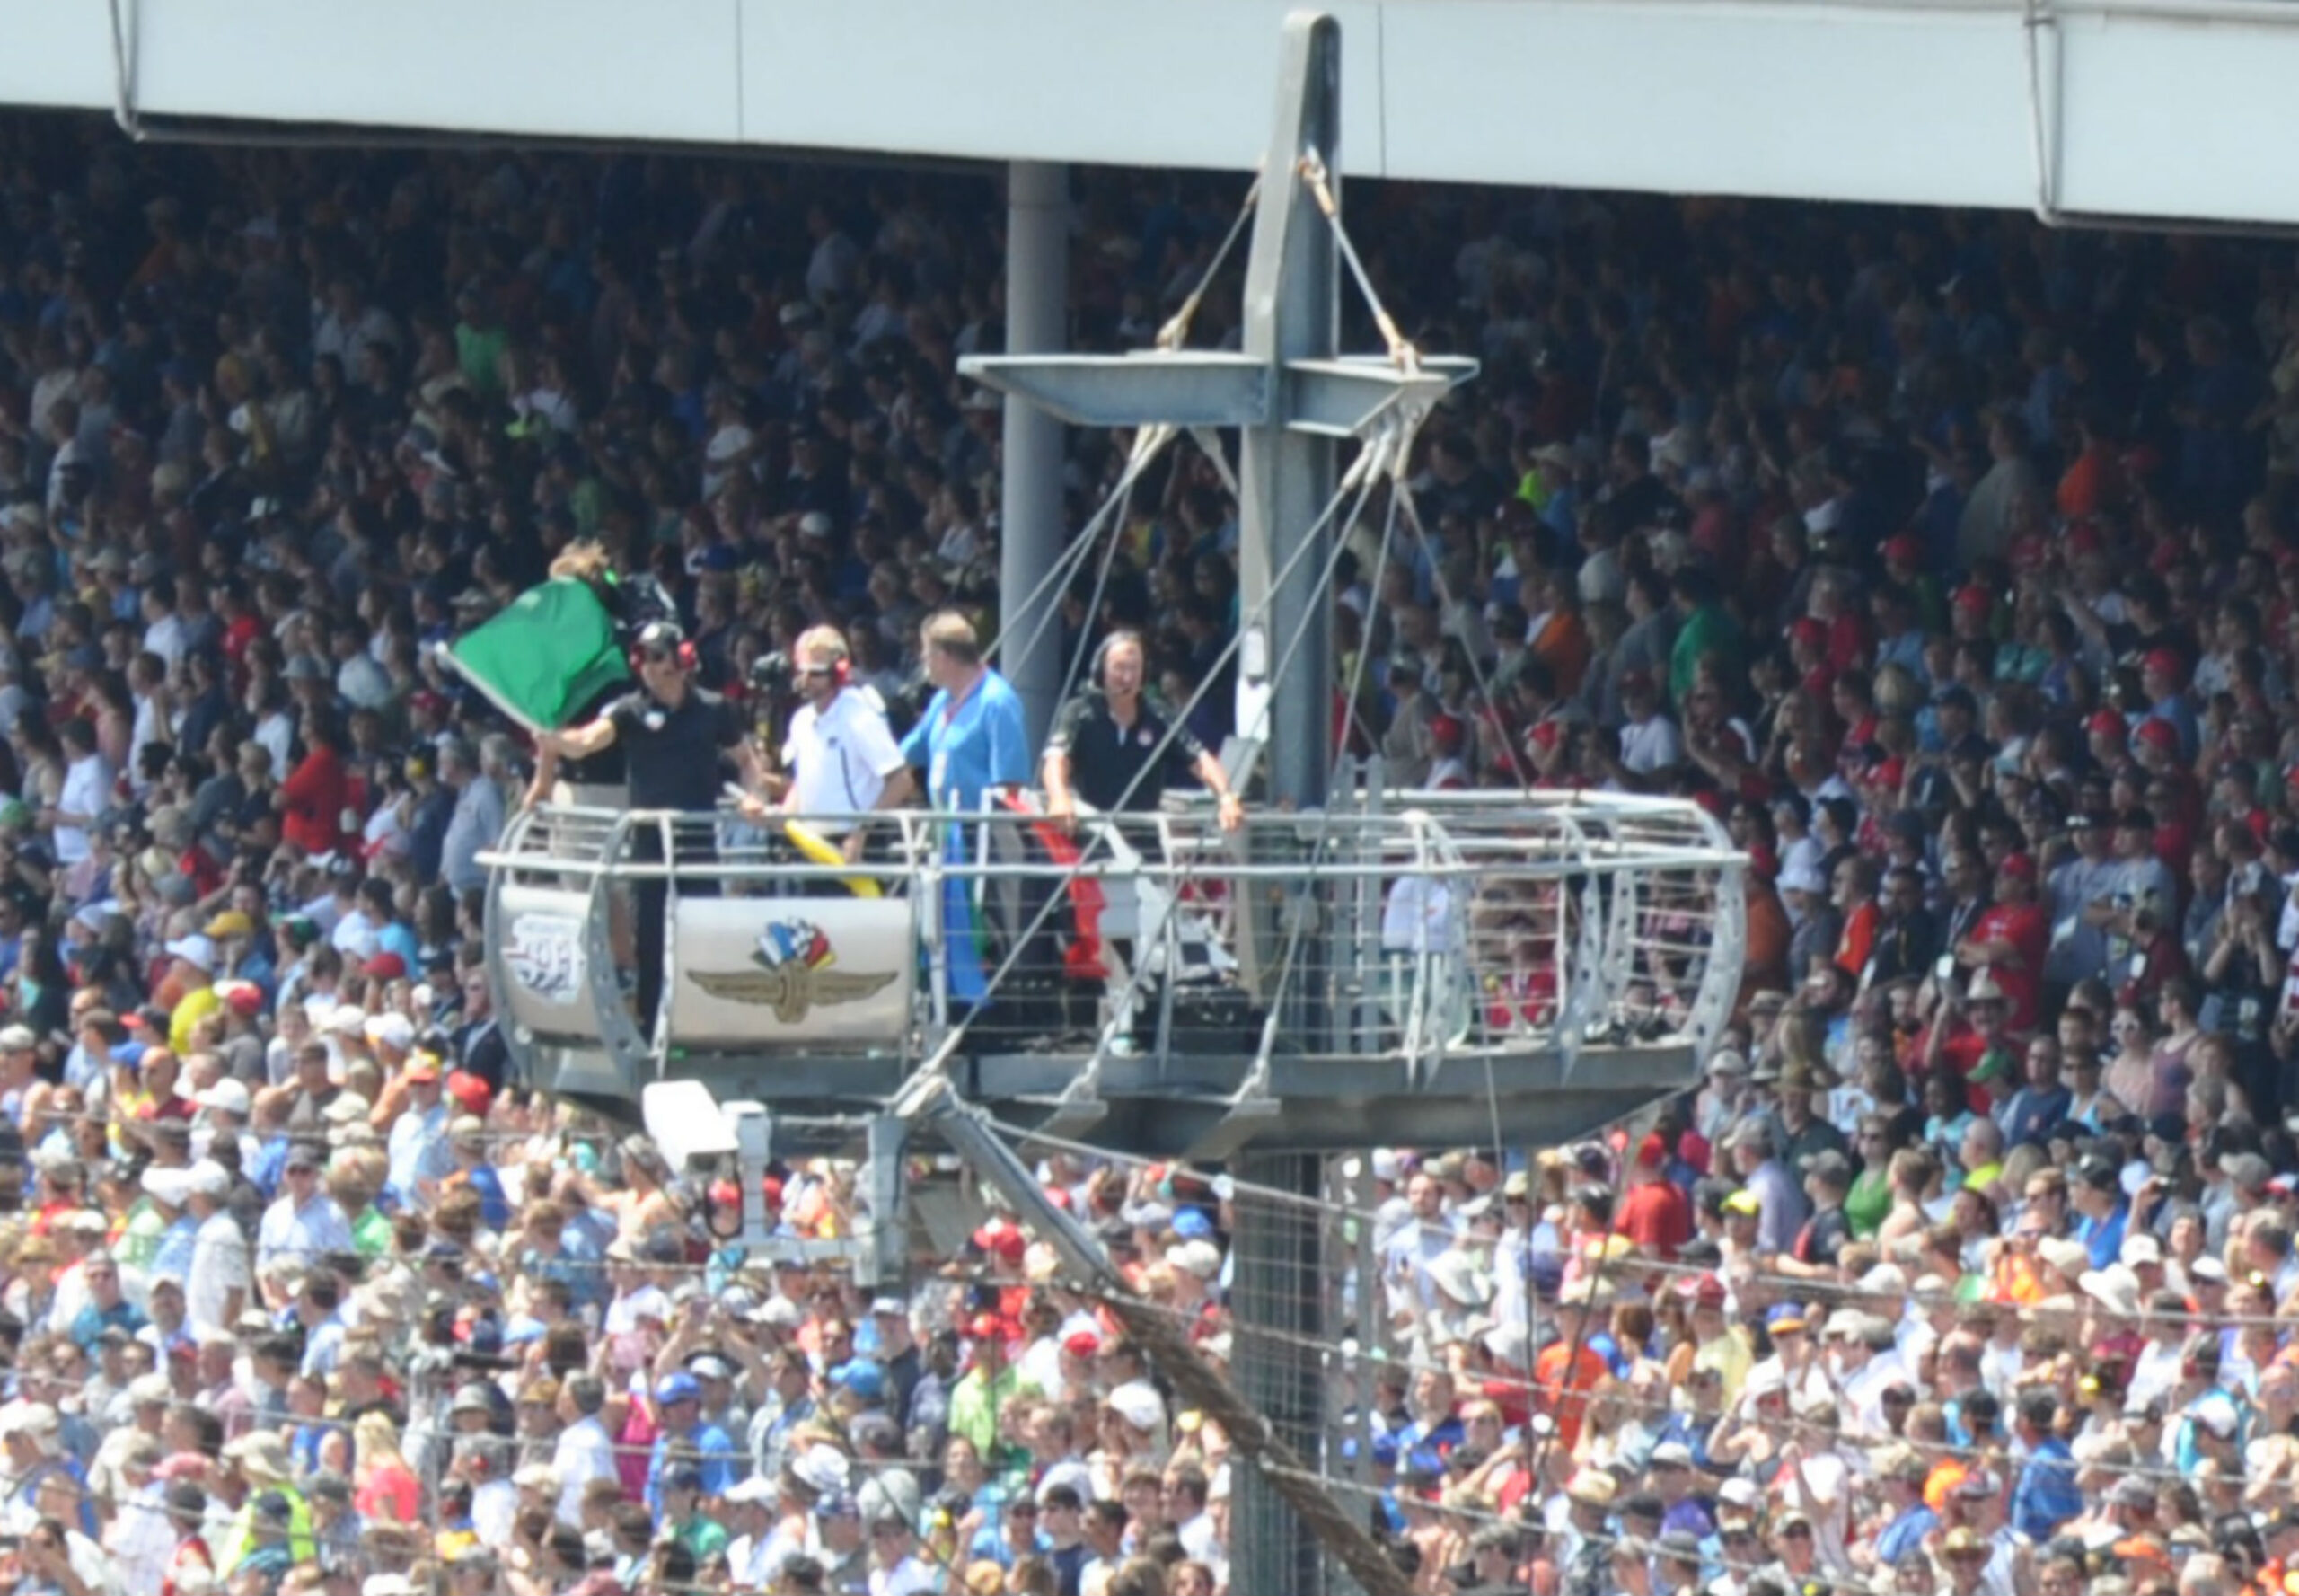 Thumbnail for the post titled: IMS offers special ticket discounts for 2016 Indianapolis 500 fans